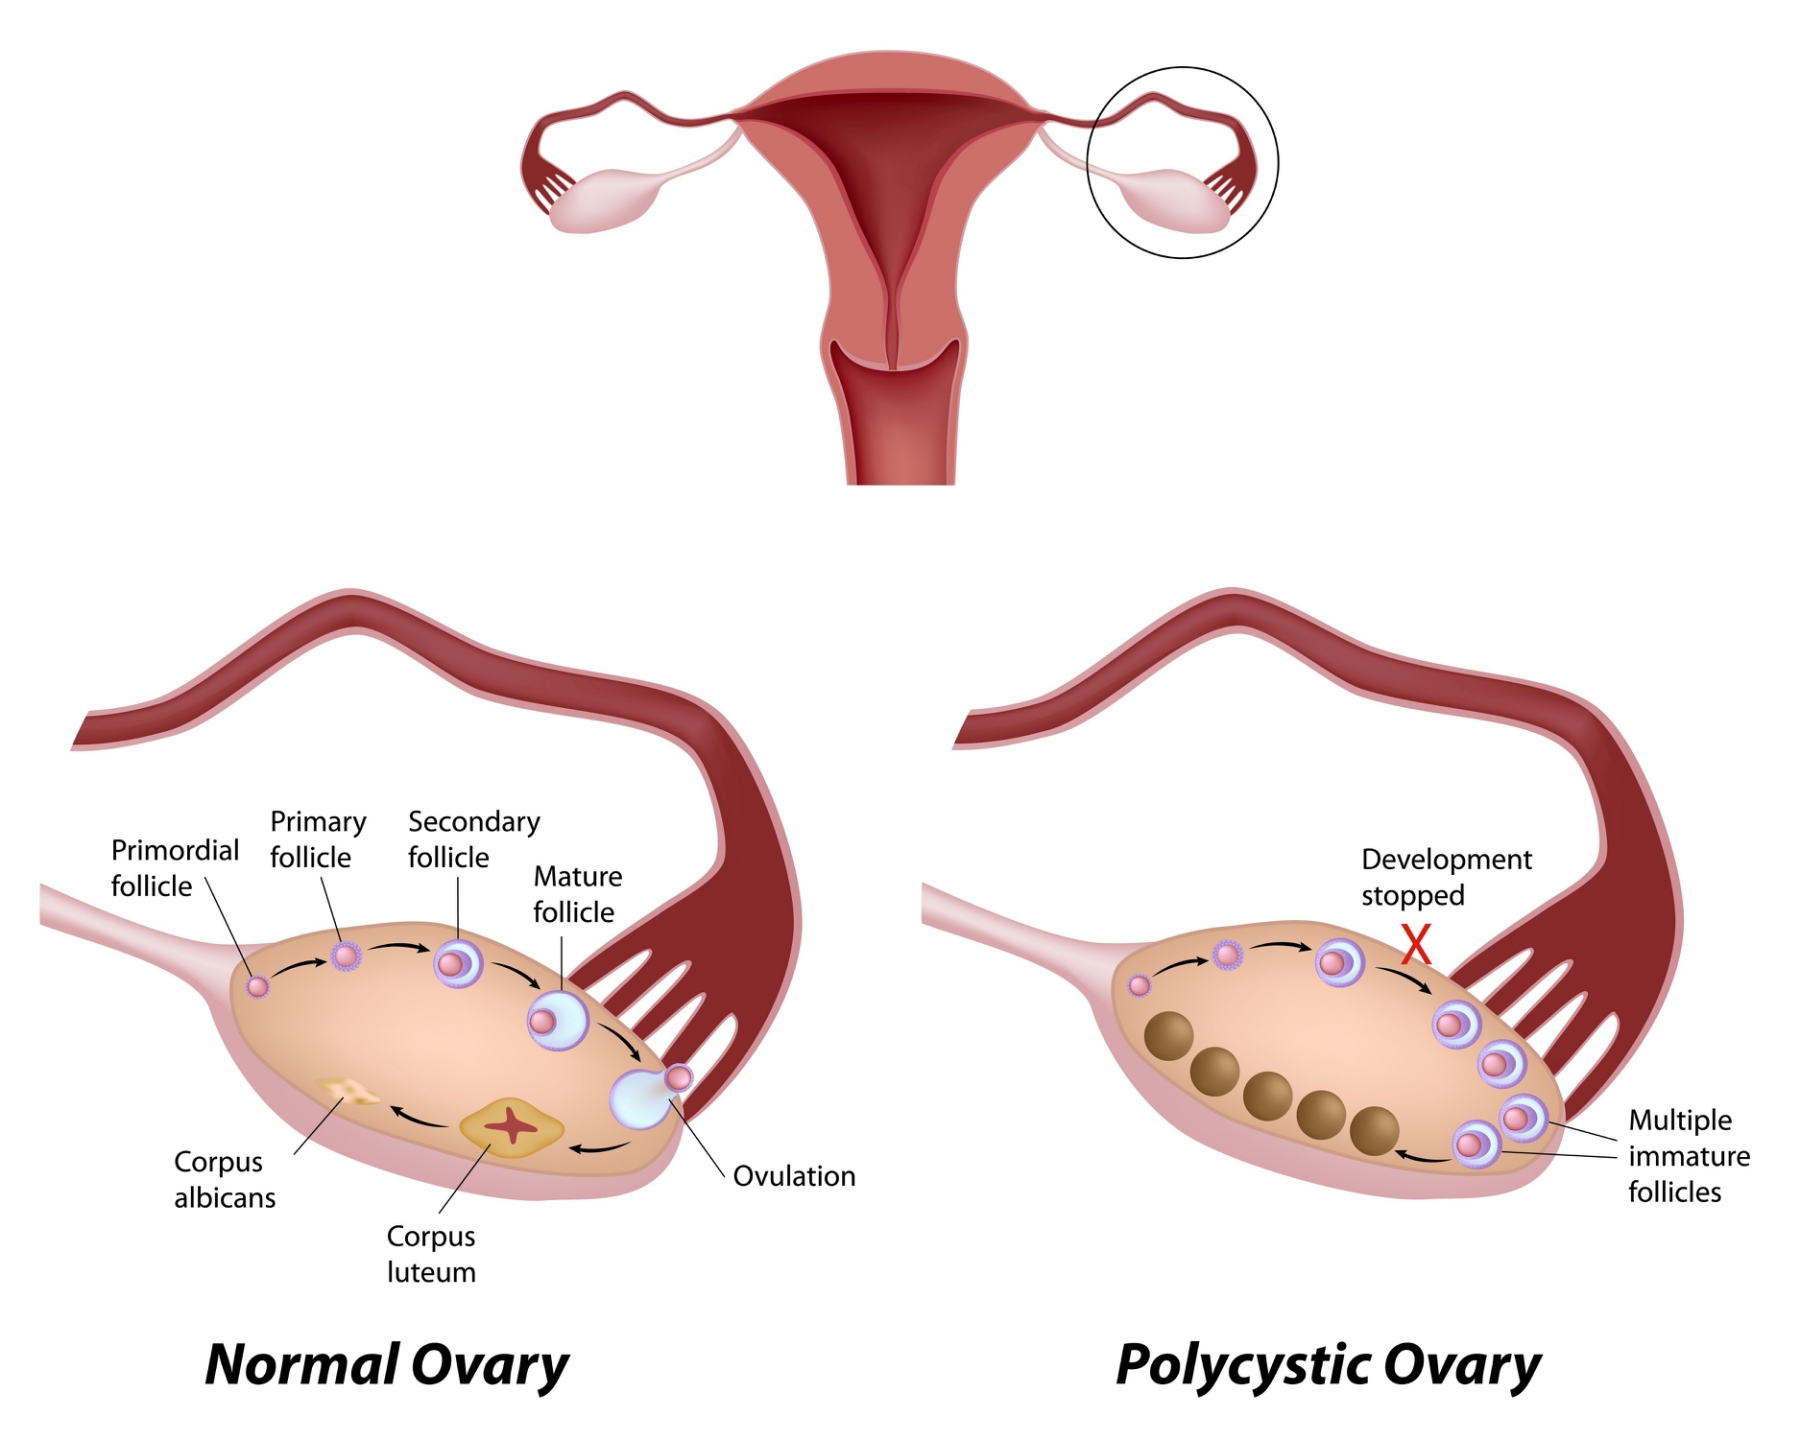 I-fern Products. 001 - What is Ovarian Cyst? An ovarian cyst is a